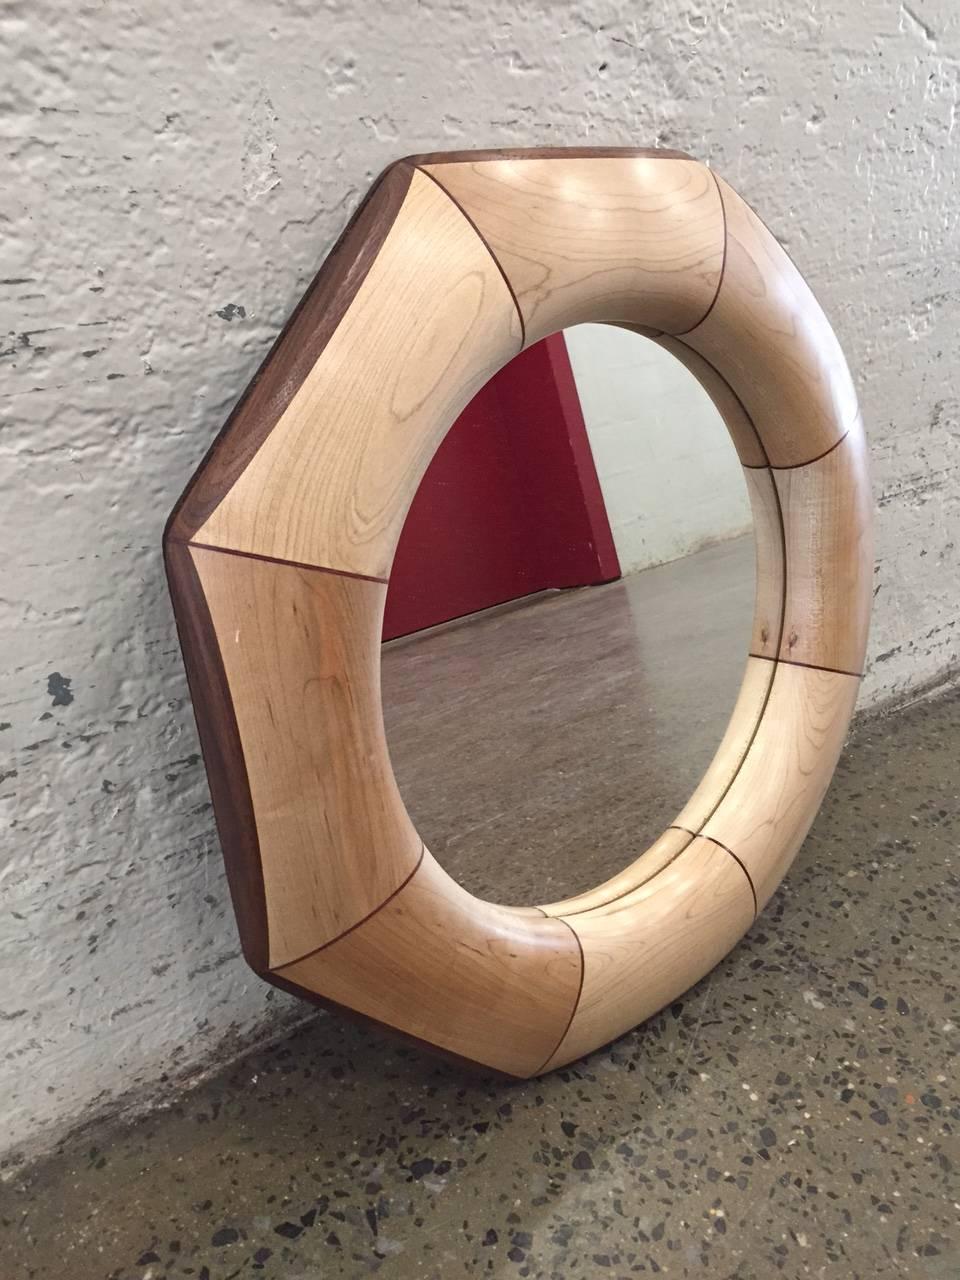 Custom octagonal mirror with maple and rosewood inlay.
The mirror listed is currently available.